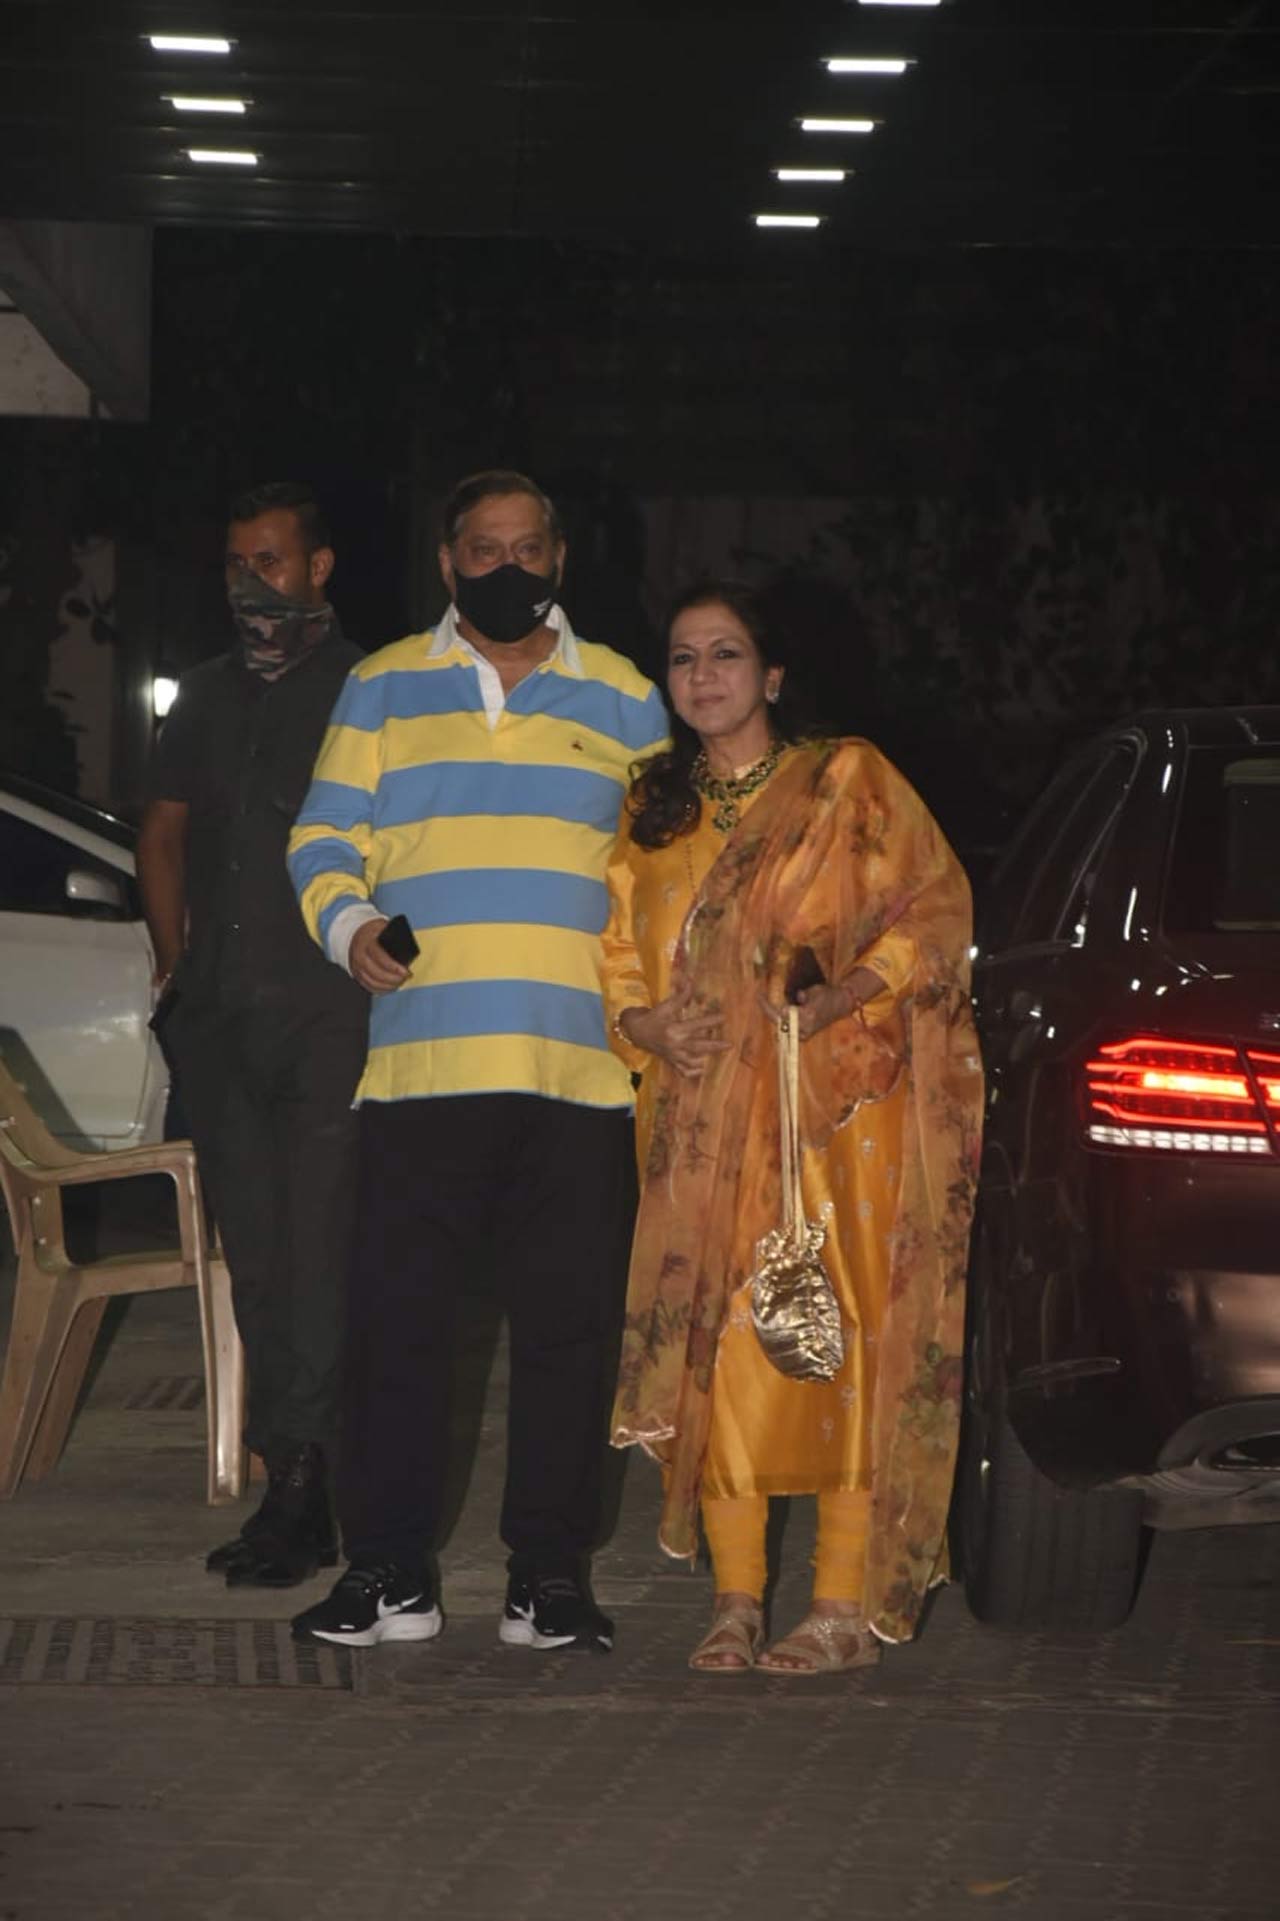 David Dhawan and his wife Karuna Dhawan were all smiles as they arrived at Sohail Khan's Bandra home to be a part of the Diwali celebration.